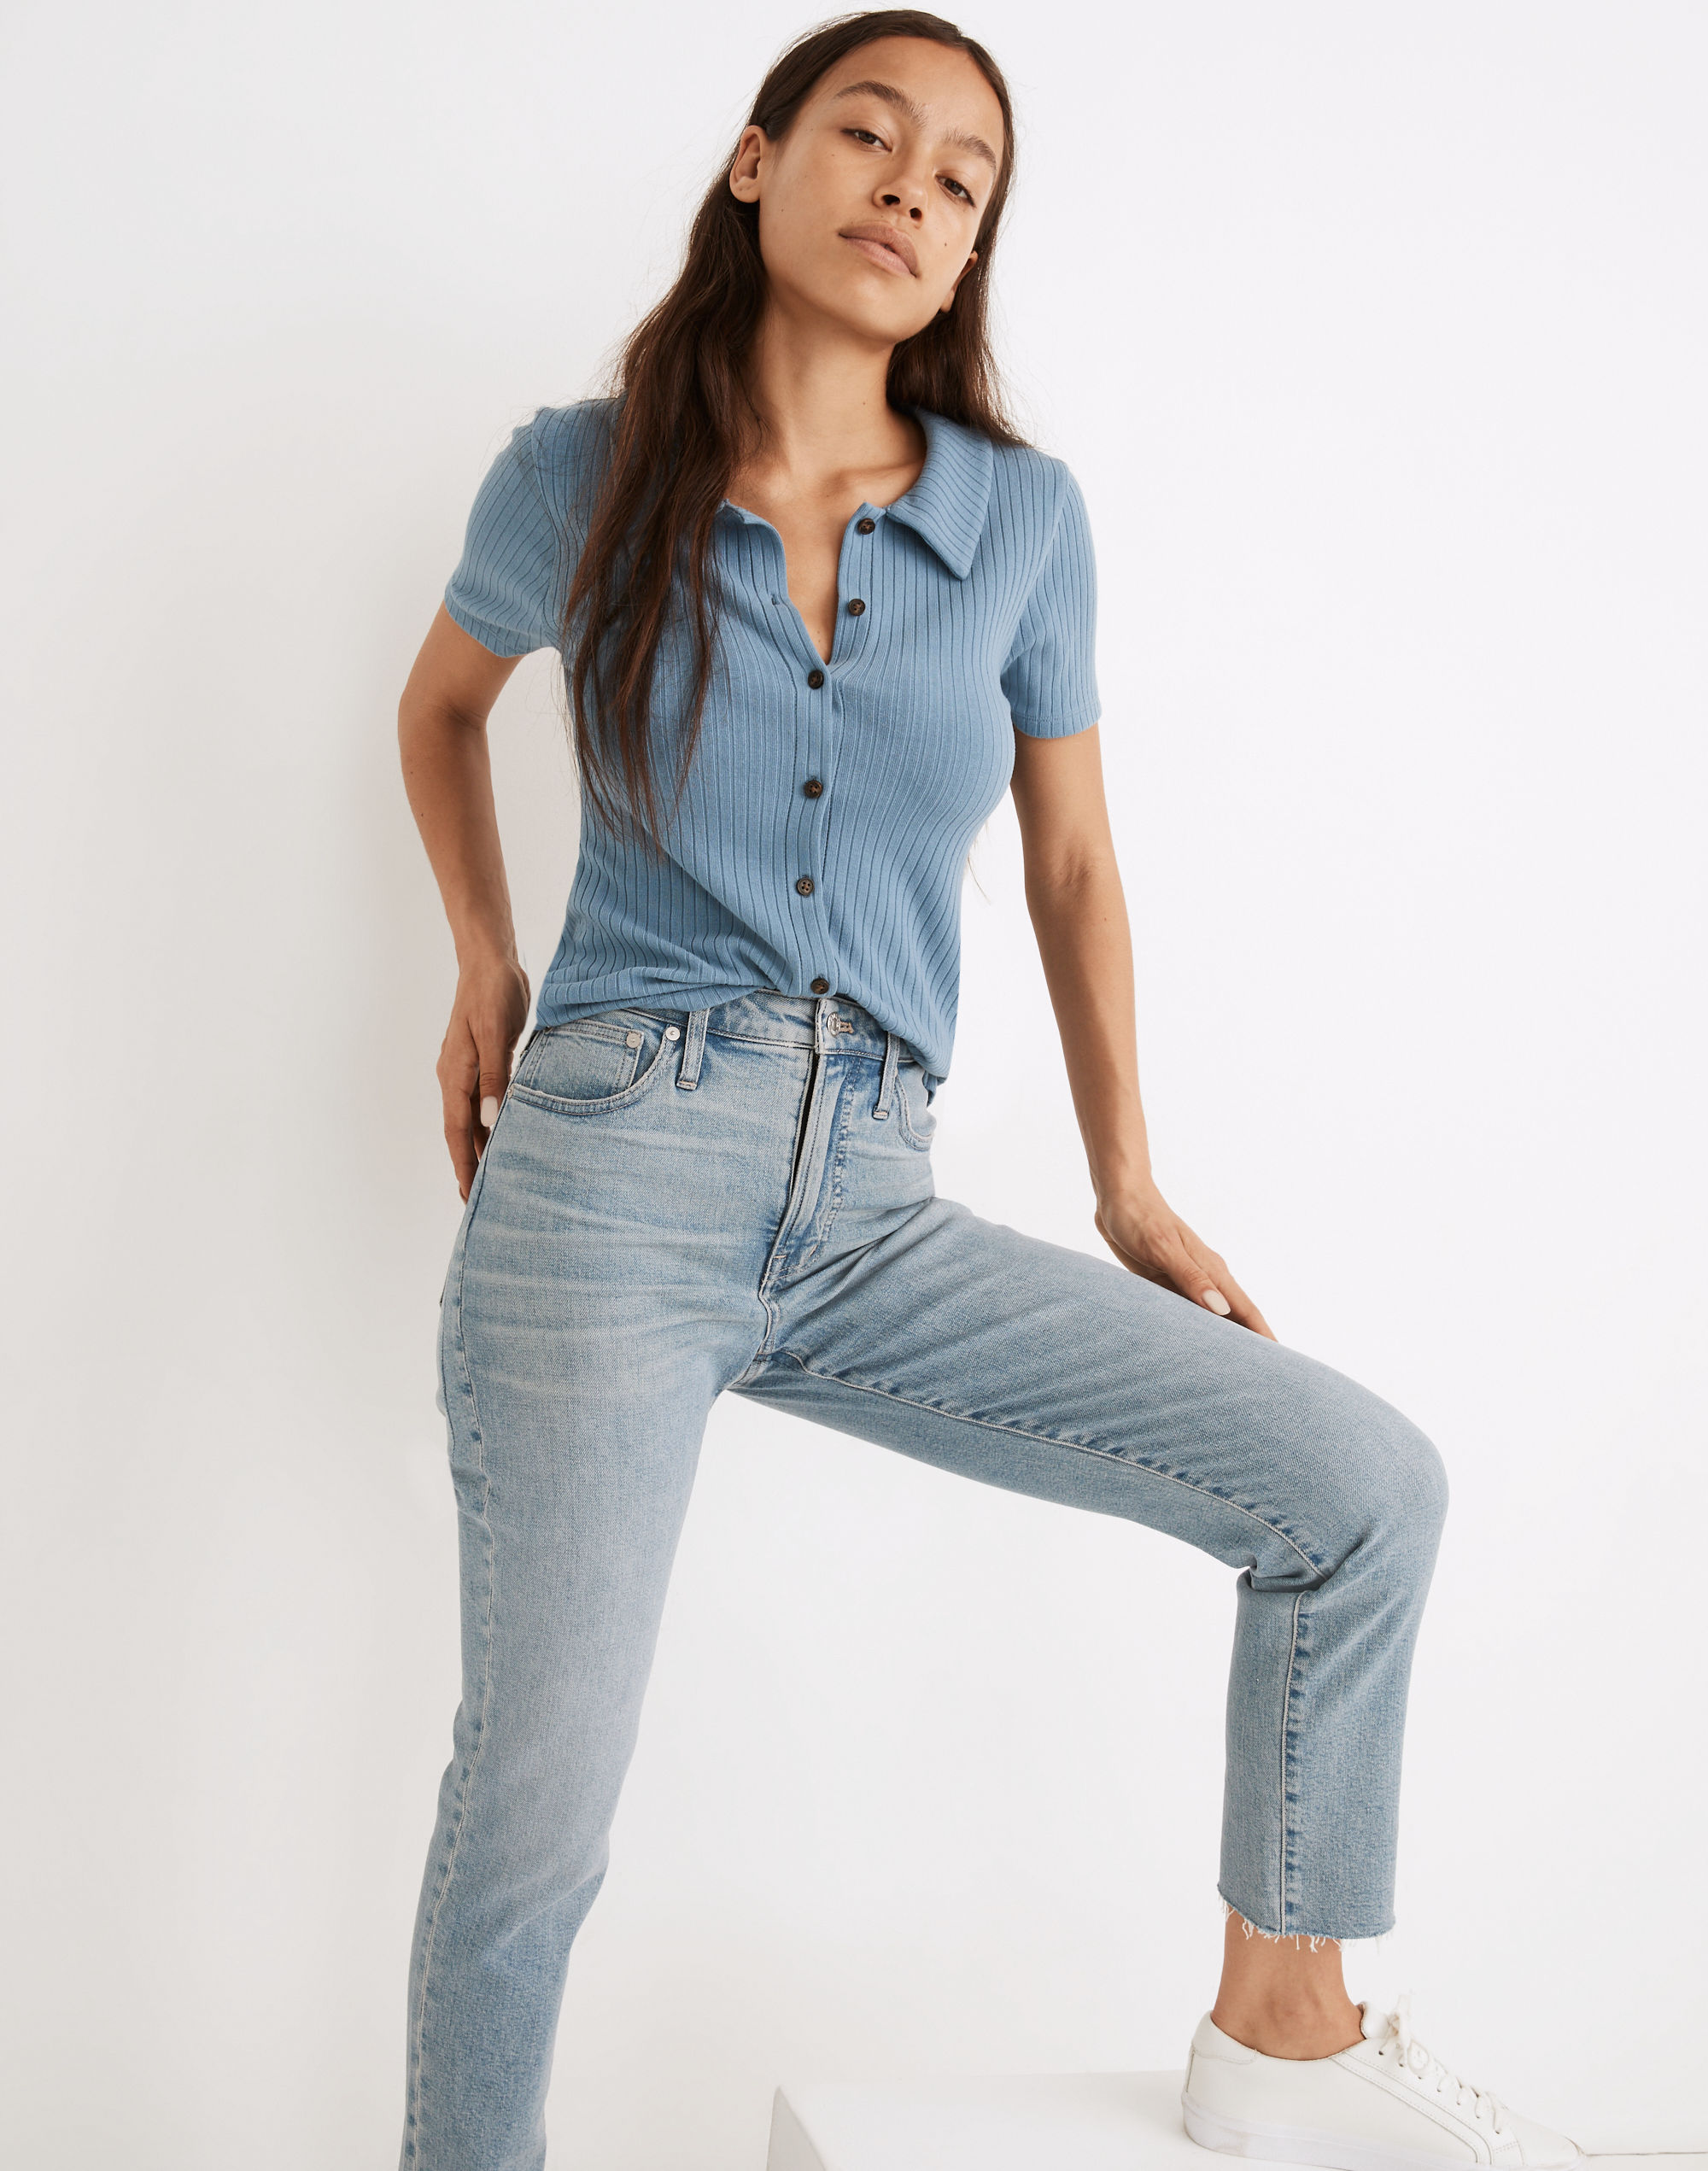 The Curvy Perfect Vintage Jean in Ellicott Wash